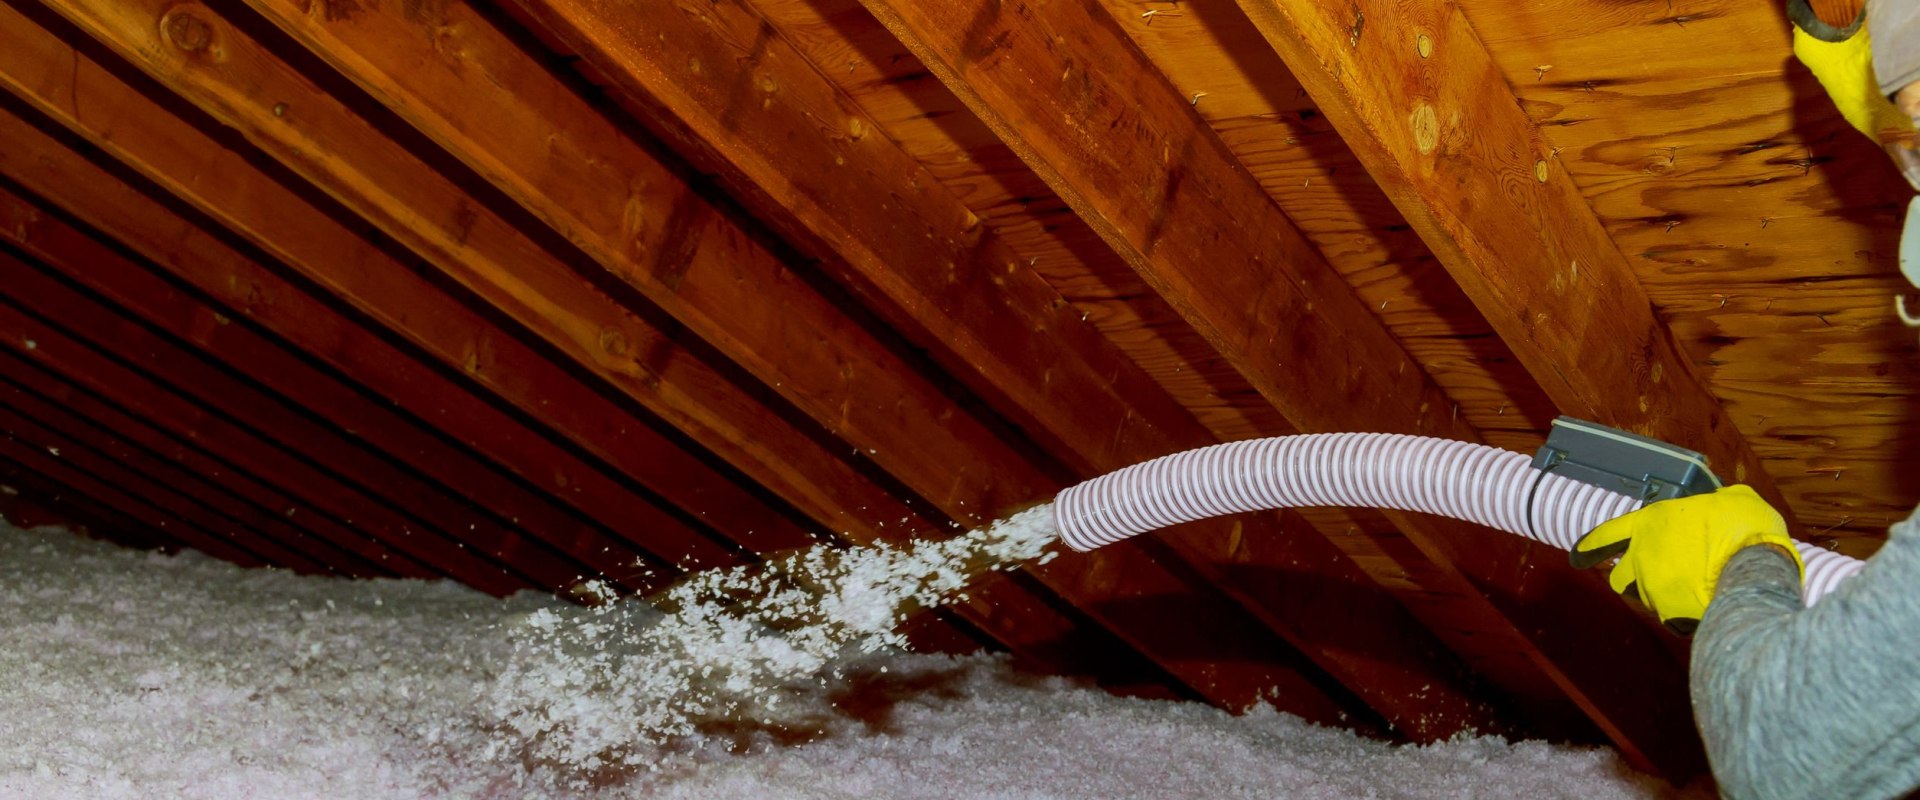 Can I Use Fiberglass Insulation for My Home's Air Conditioning System in Florida?